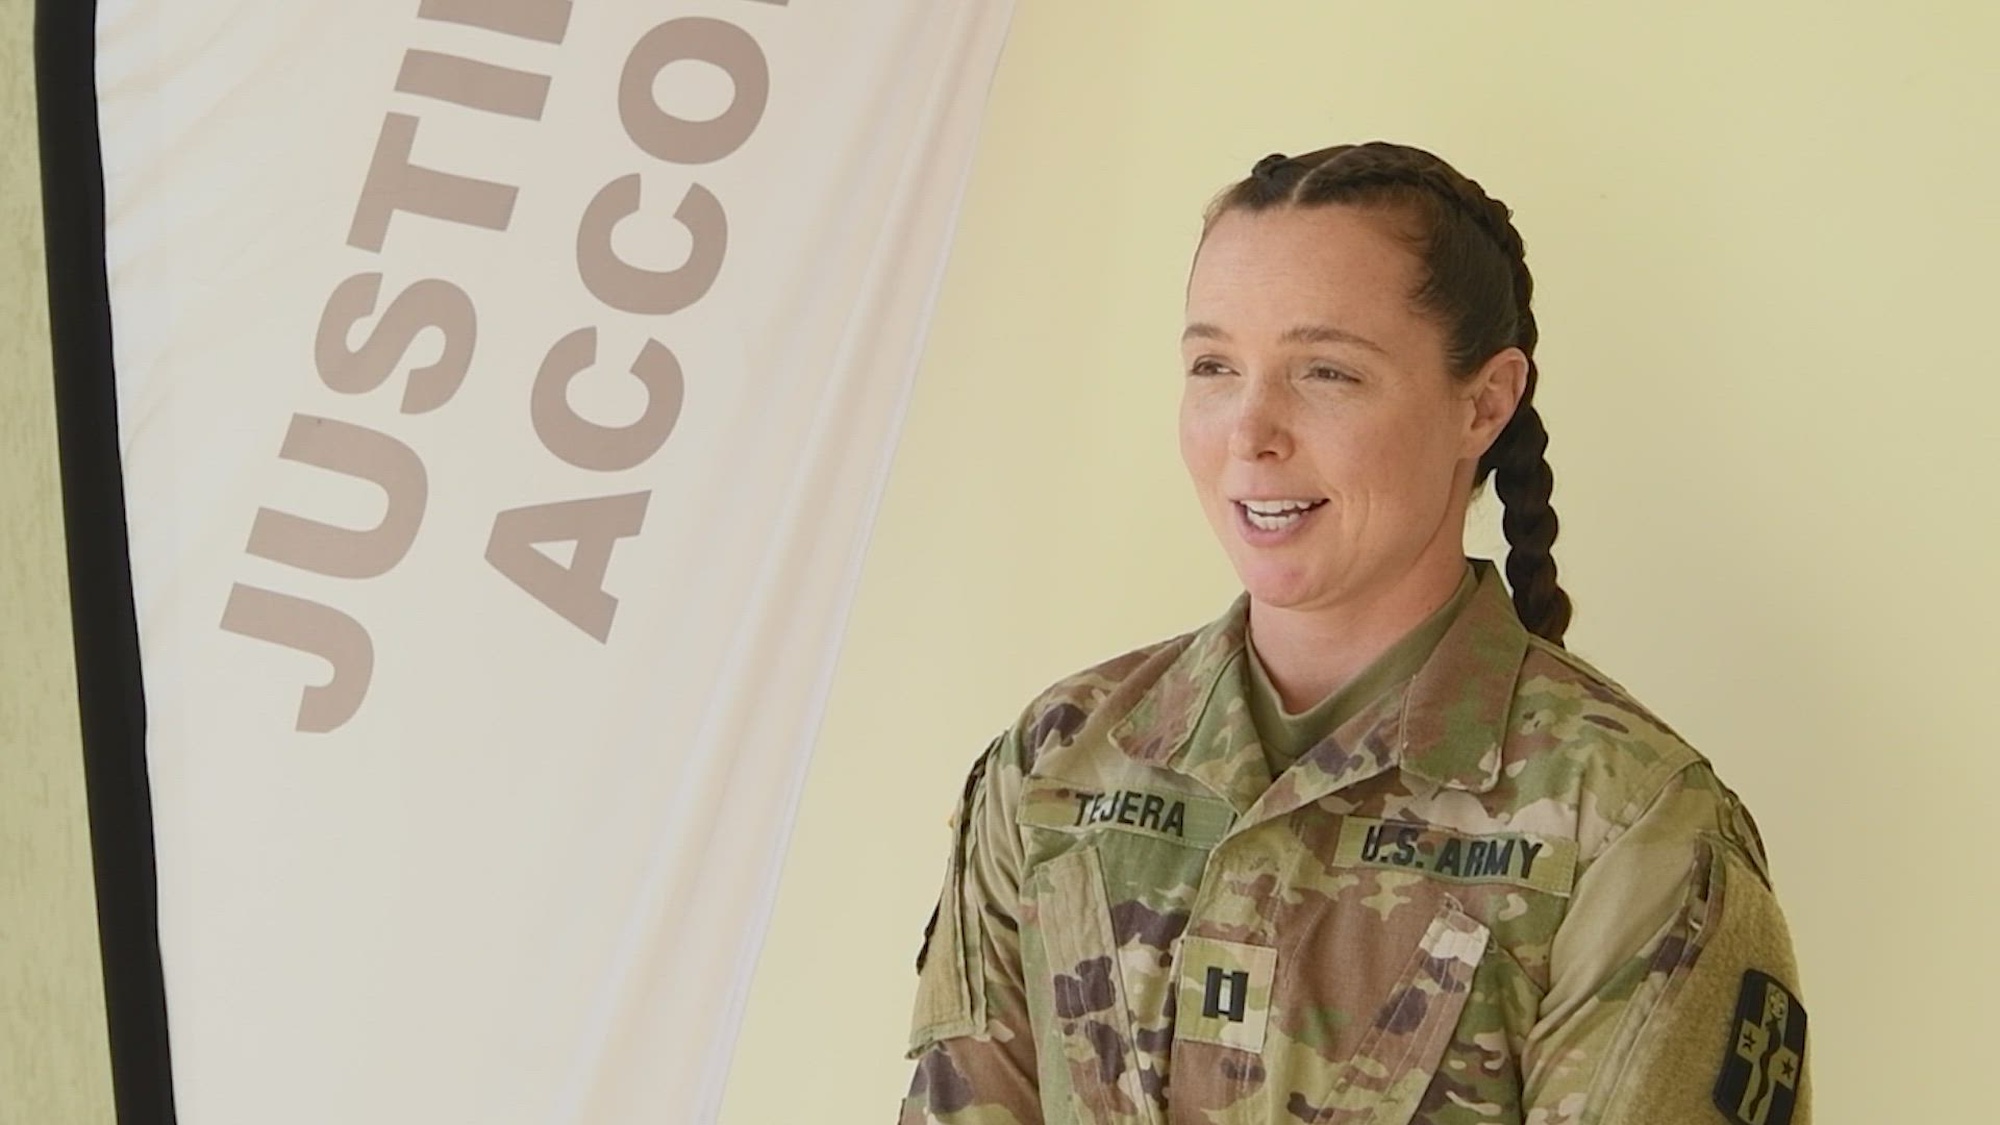 U.S. Army Capt. Paige Tejera, 628 Forward Resuscitative Surgical Detachment, a U.S. Army Reserve unit out of San Antonio, Tx., discusses her career, Women’s History Month, and her work at Justified Accord (JA24) at the Counter Insurgency Terrorism and Stability Operations Training Centre, Nanyuki, Kenya, February 29, 2024. JA 2024 is U.S. Africa Command's largest exercise in East Africa, running from Feb. 26 - March 7. Led by U.S. Army Southern European Task Force, Africa (SETAF-AF), and hosted in Kenya, this year's exercise will incorporate personnel and units from 23 nations. This multinational exercise builds readiness for the U.S. joint force, prepares regional partners for UN and AU mandated missions, and increases multinational interoperability in support of humanitarian assistance, disaster response and crisis response. (U.S. Department of Defense video by Army Staff Sgt. Willie Reese IV)